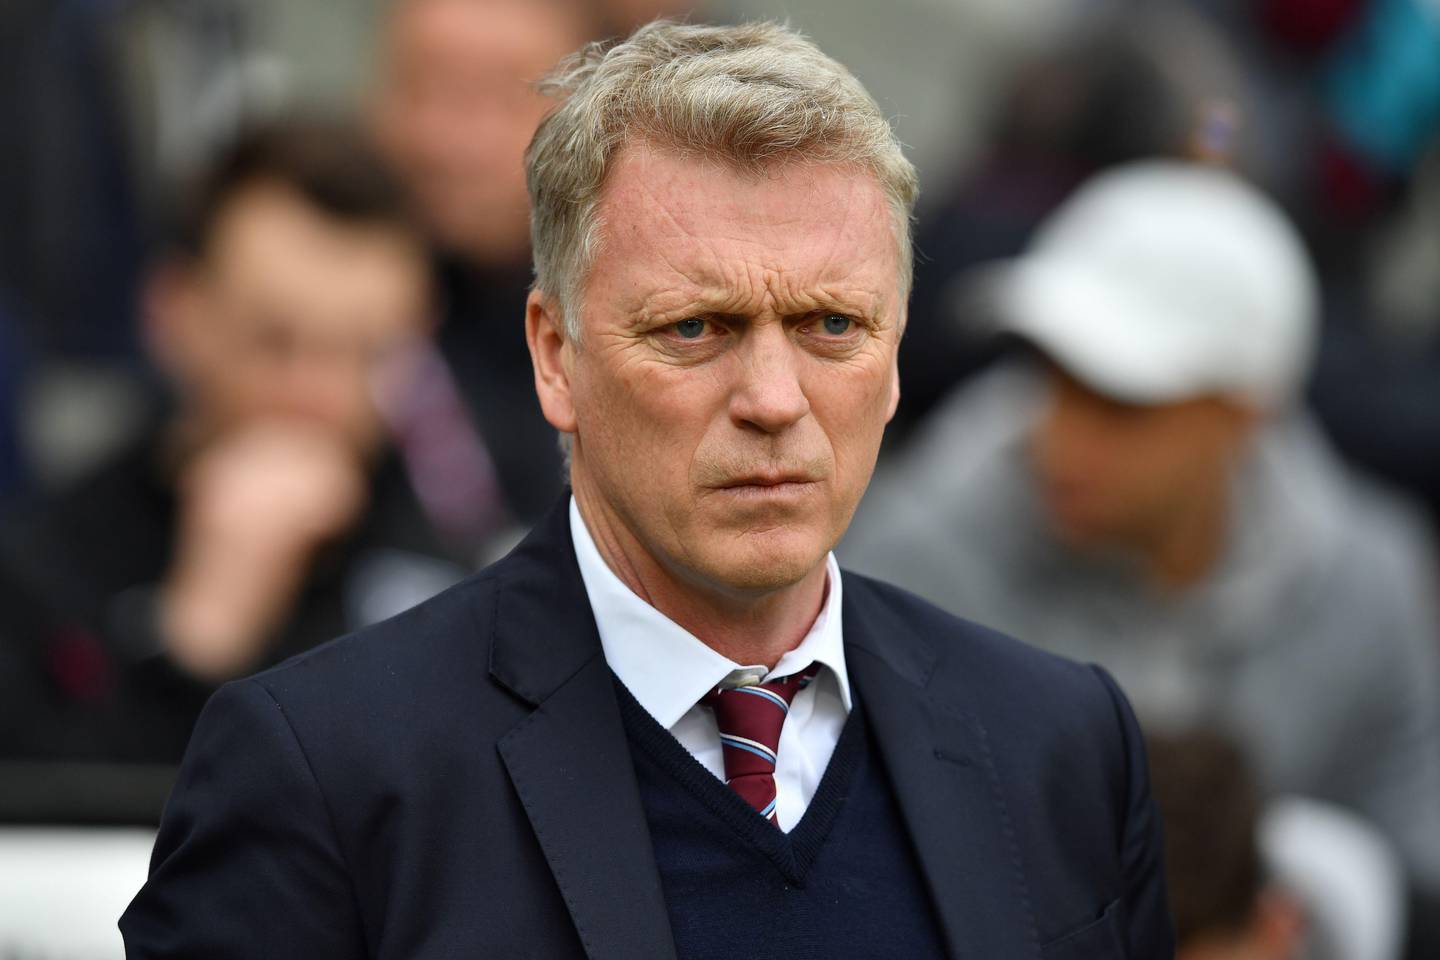 (FILES) In this file photo taken on April 29, 2018 West Ham United's Scottish manager David Moyes arrives for the English Premier League football match between West Ham United and Manchester City at The London Stadium, in east London.
David Moyes has left West Ham following the end of his short-term contract, the Premier League club announced on May 16, 2018. The 55-year-old former Everton and Manchester United boss arrived at London Stadium in November, with the sole objective of ensuring the Hammers' top-flight status, which he achieved. / AFP PHOTO / Ben STANSALL / RESTRICTED TO EDITORIAL USE. No use with unauthorized audio, video, data, fixture lists, club/league logos or 'live' services. Online in-match use limited to 75 images, no video emulation. No use in betting, games or single club/league/player publications.  / 